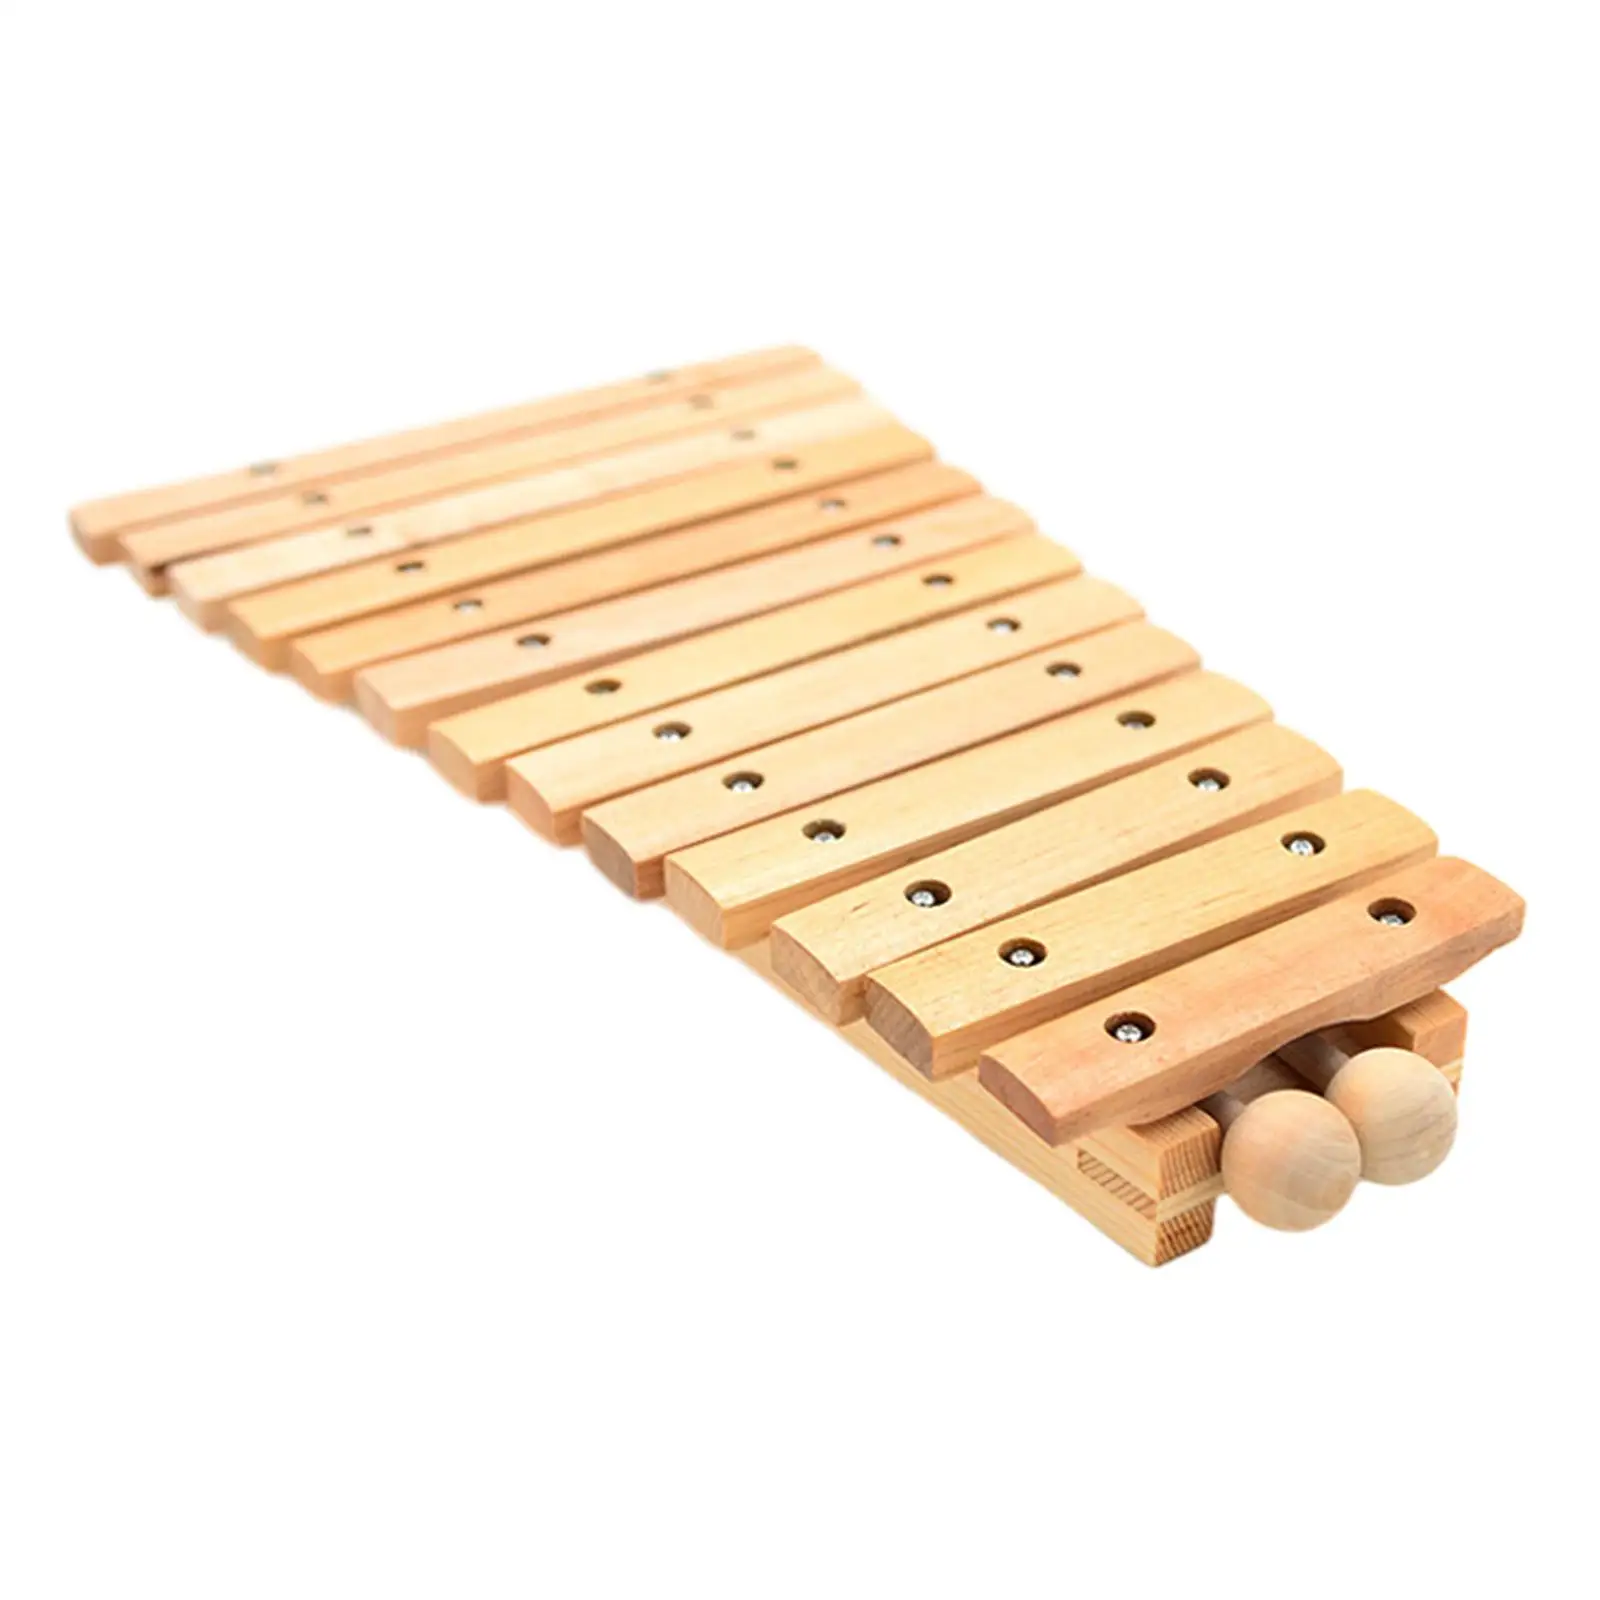 13 Note Xylophone Hand Knock Piano Toy Wood Hand Percussion Xylophone for Kids Montessori for Event School Orchestras Concert